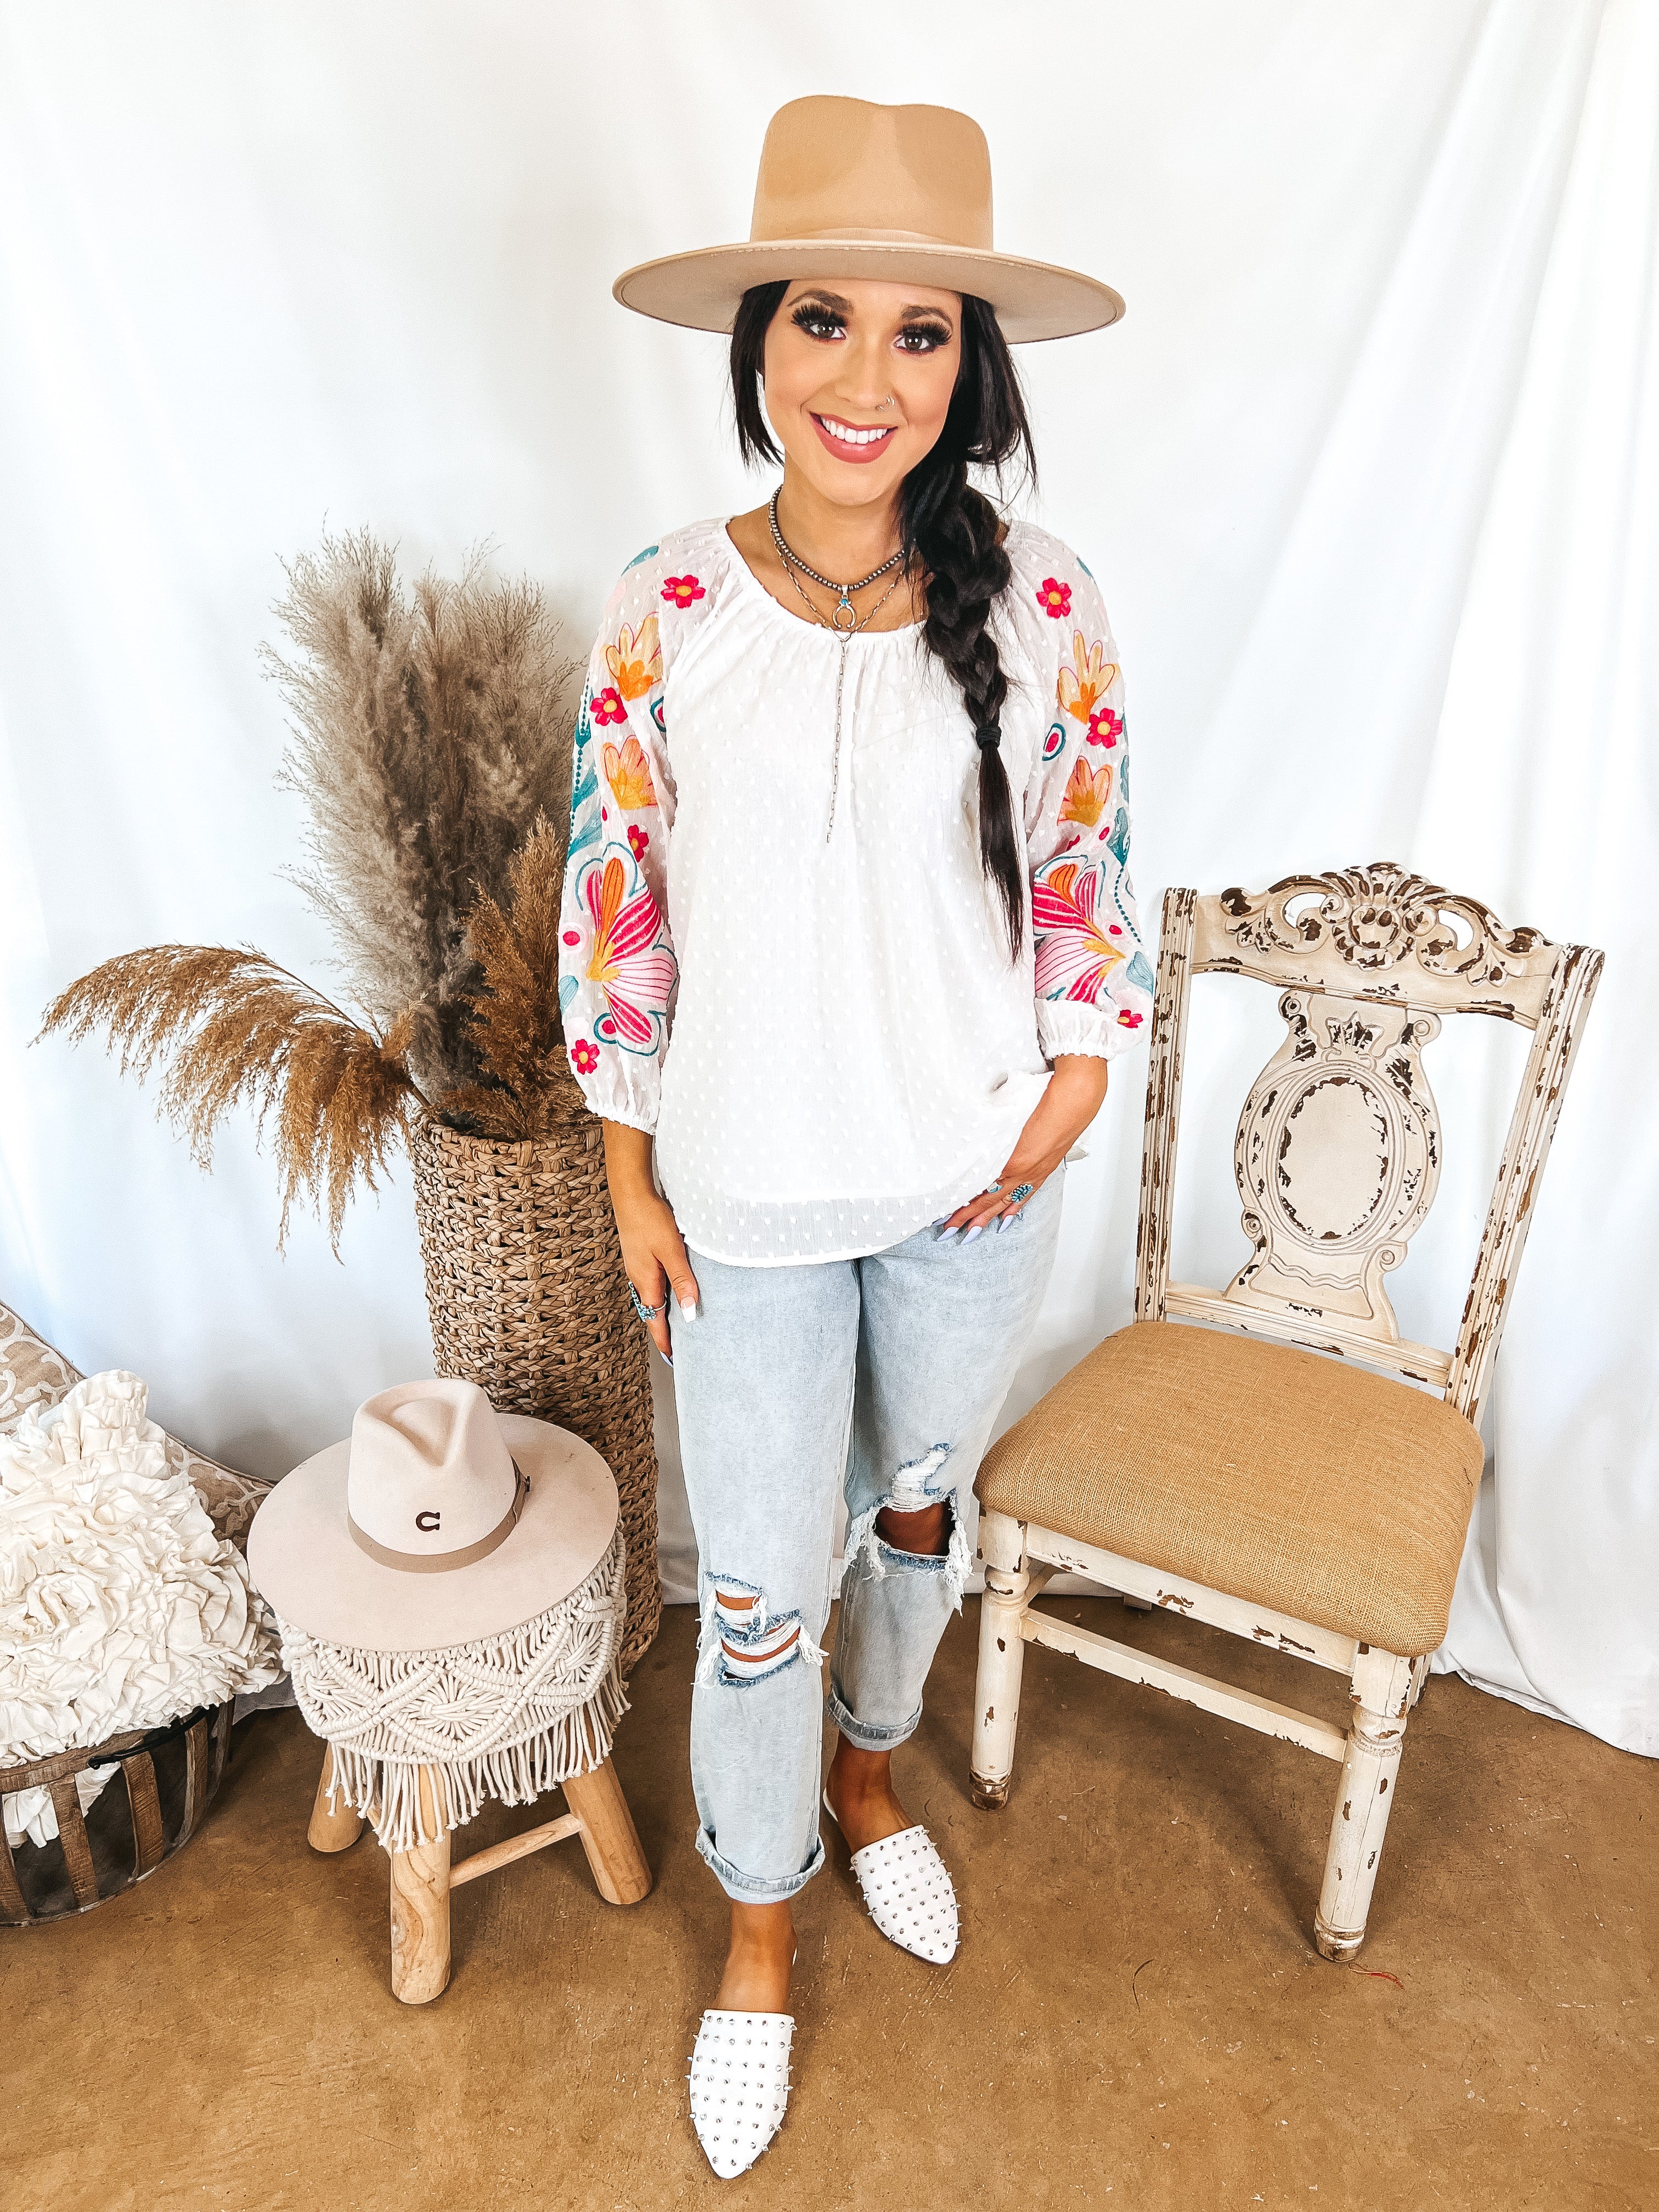 Right About You Floral Embroidered 3/4 Sleeve Top in White - Giddy Up Glamour Boutique